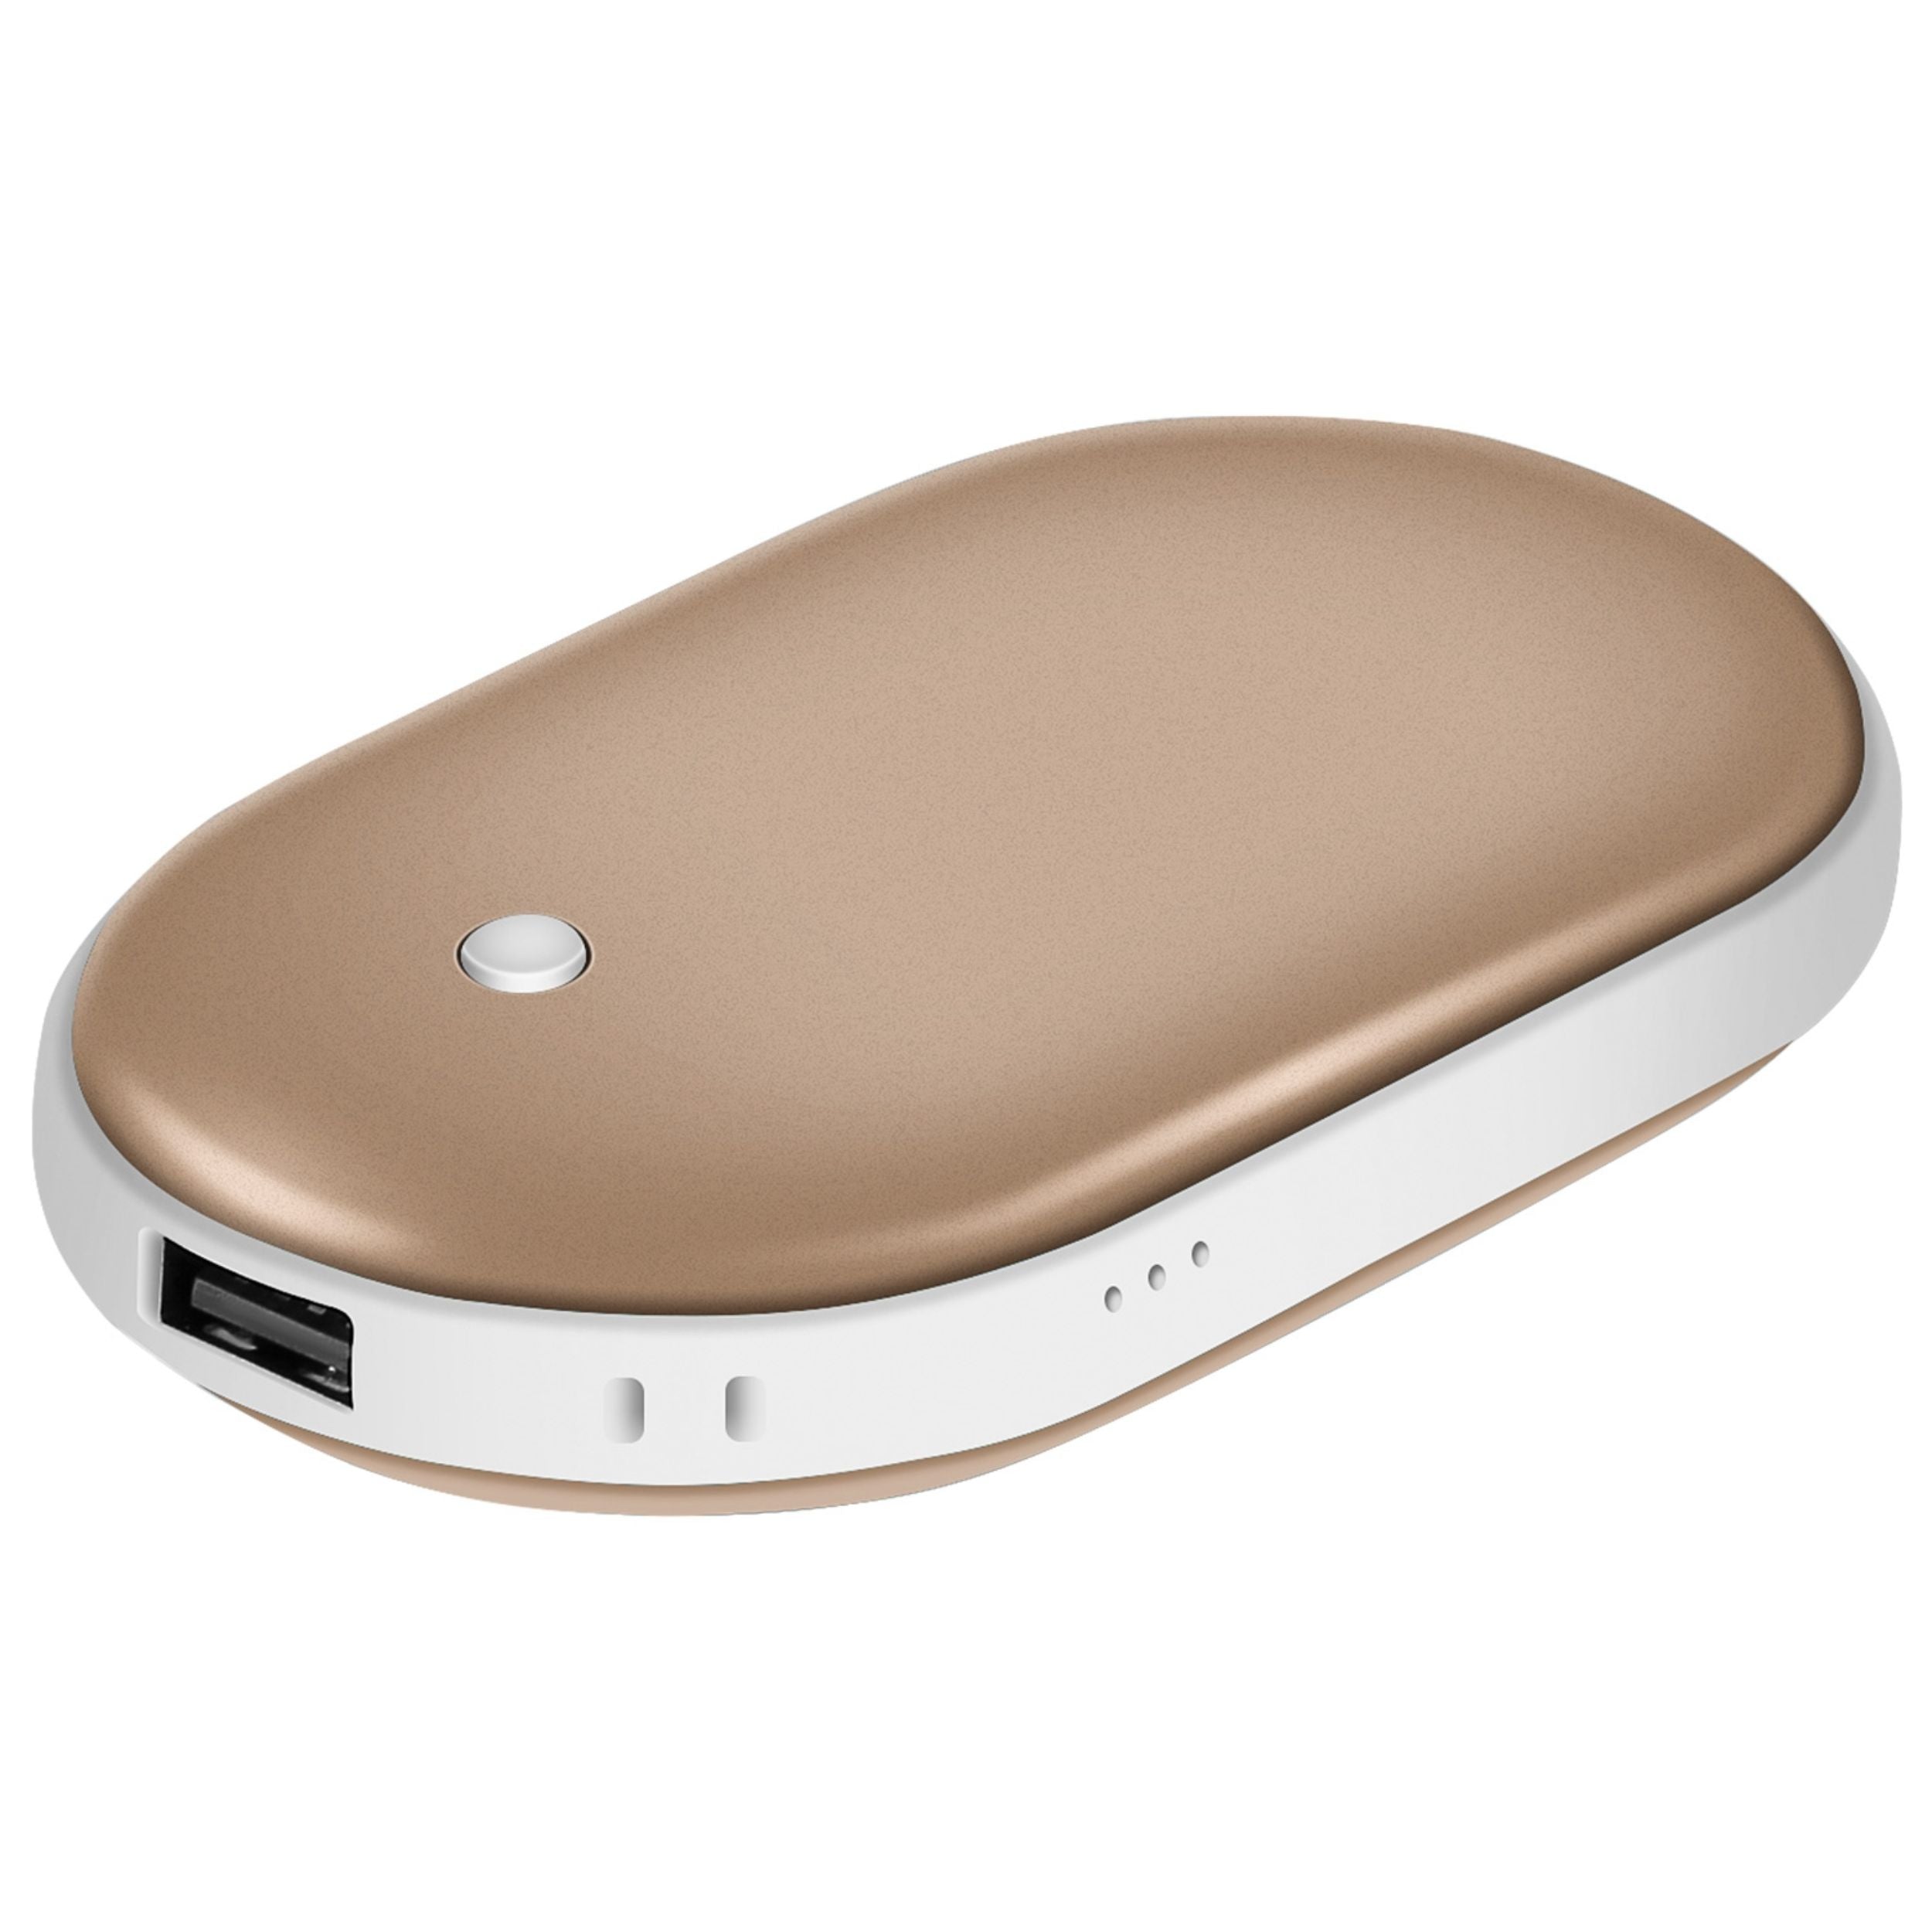 title:5000mAh Portable Hand Warmer & Power Bank - Rechargeable, Double-Sided Heating, Pocket Size;color:Gold